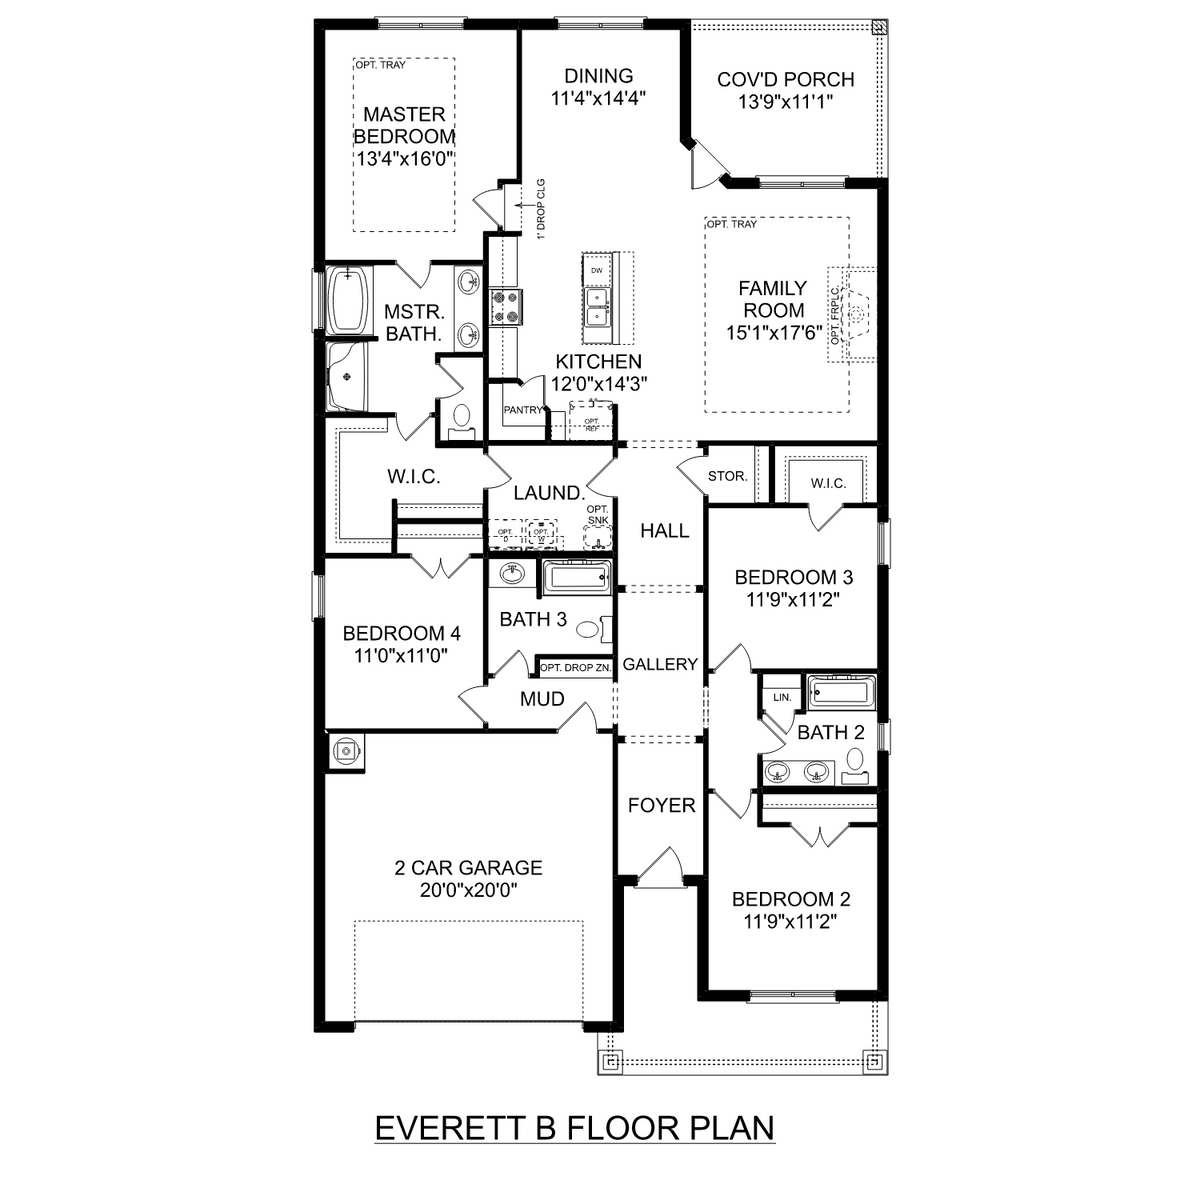 1 - The Everett B floor plan layout for 2619 Ajs Arbor Drive in Davidson Homes' Blue Spring community.